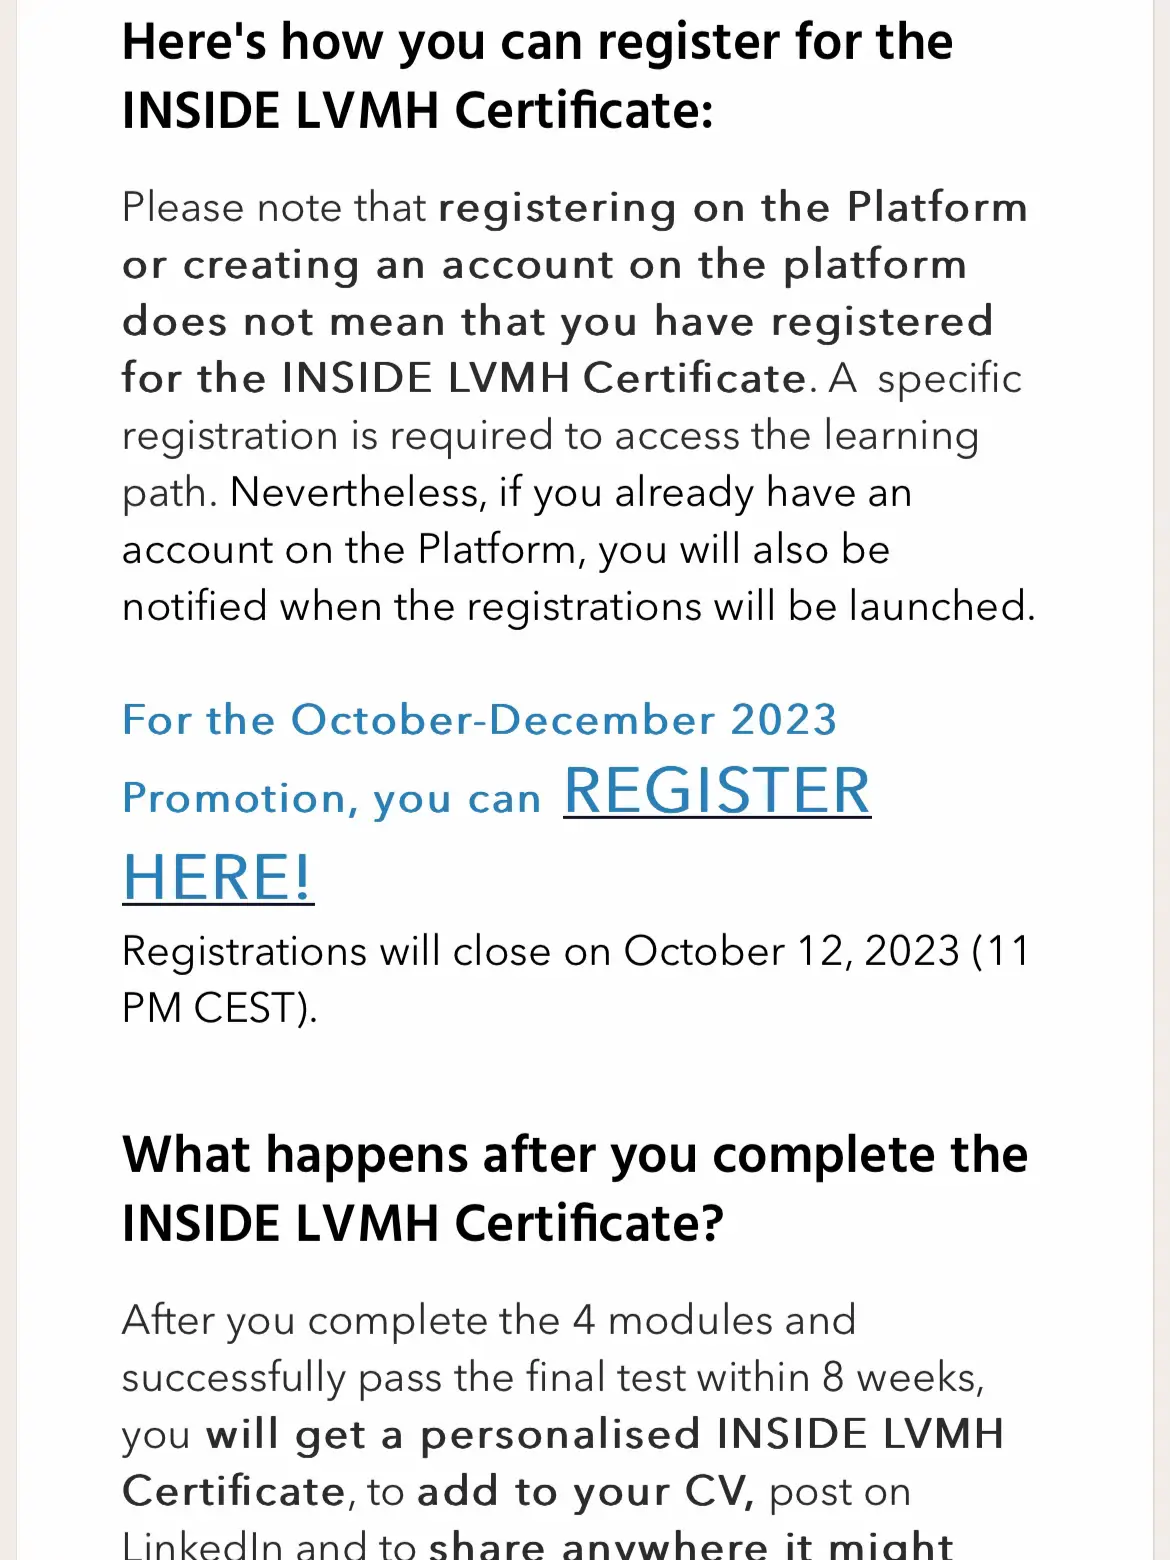 LVMH—The Inside LVMH certificate. Free of Charge! Only 3 days left